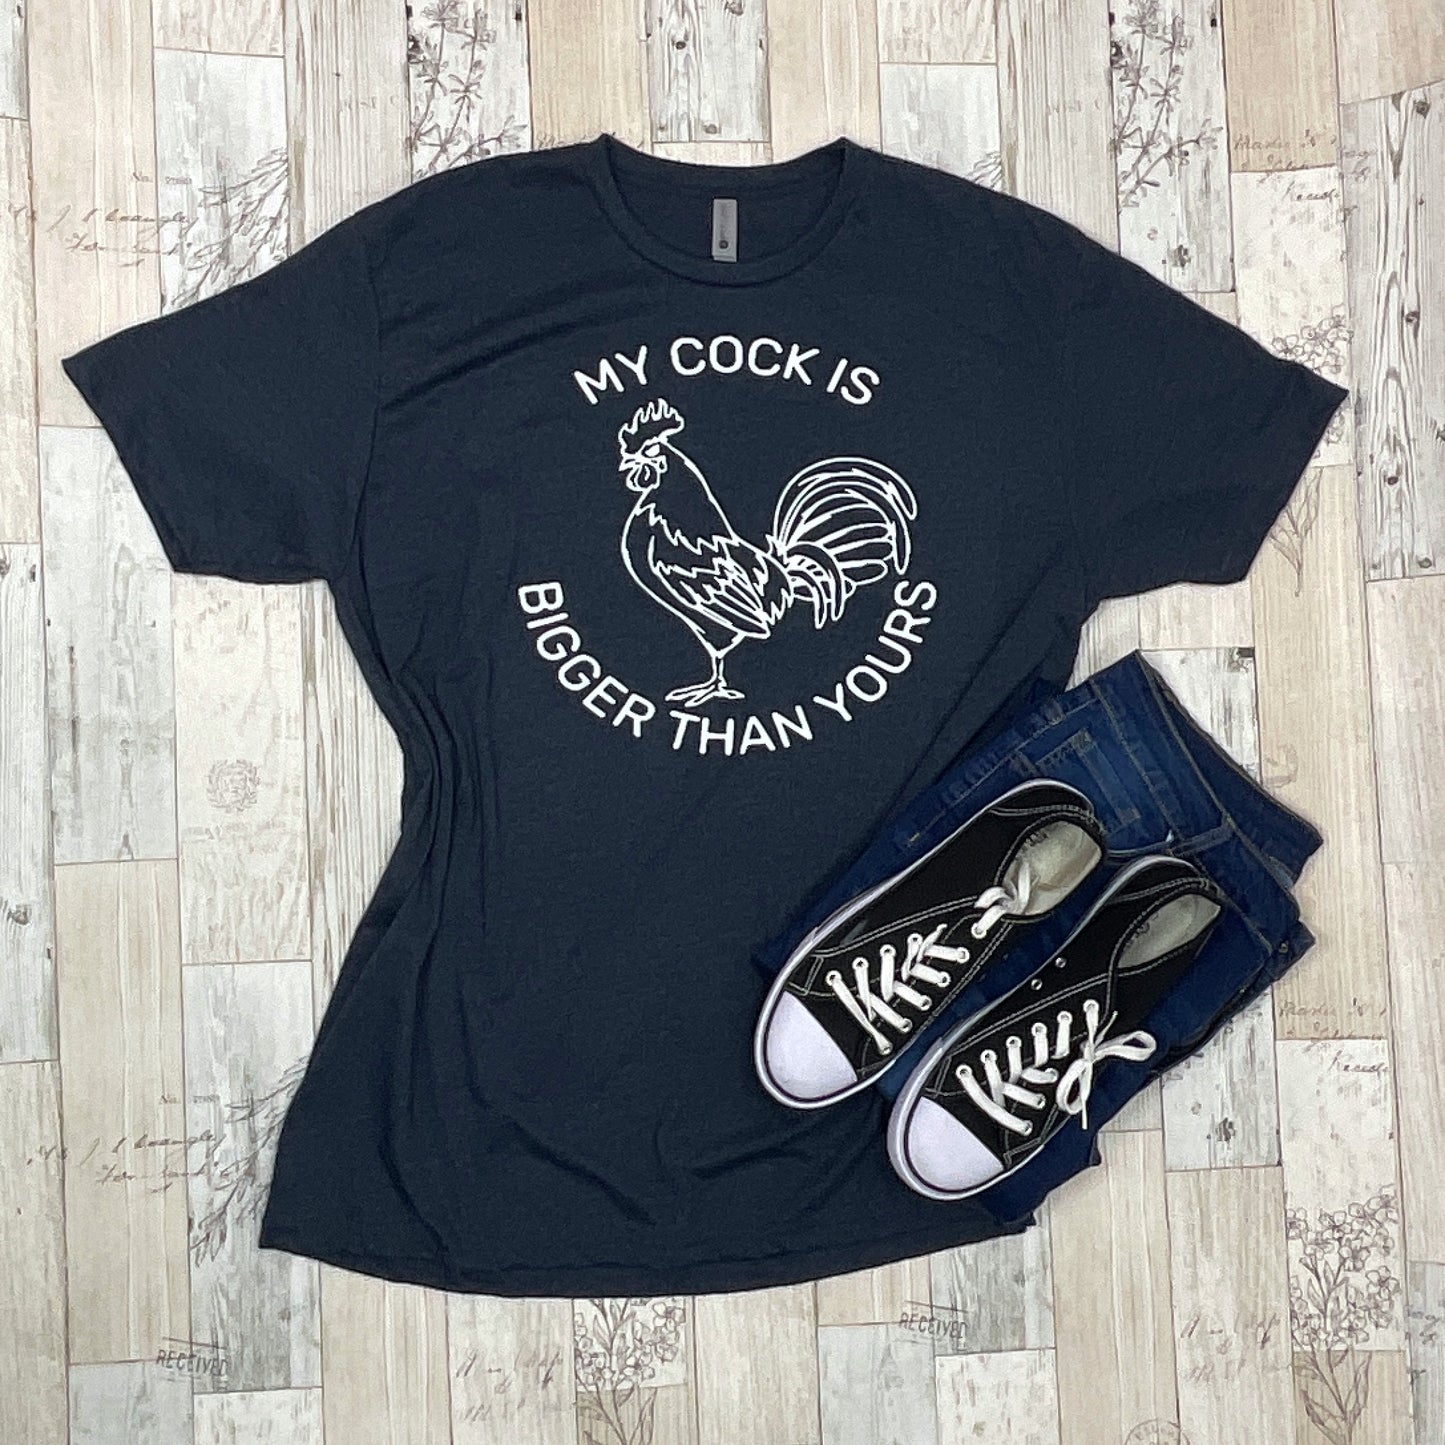 My Rooster is Bigger Than Yours Graphic Tee - Sassy Chick Clothing